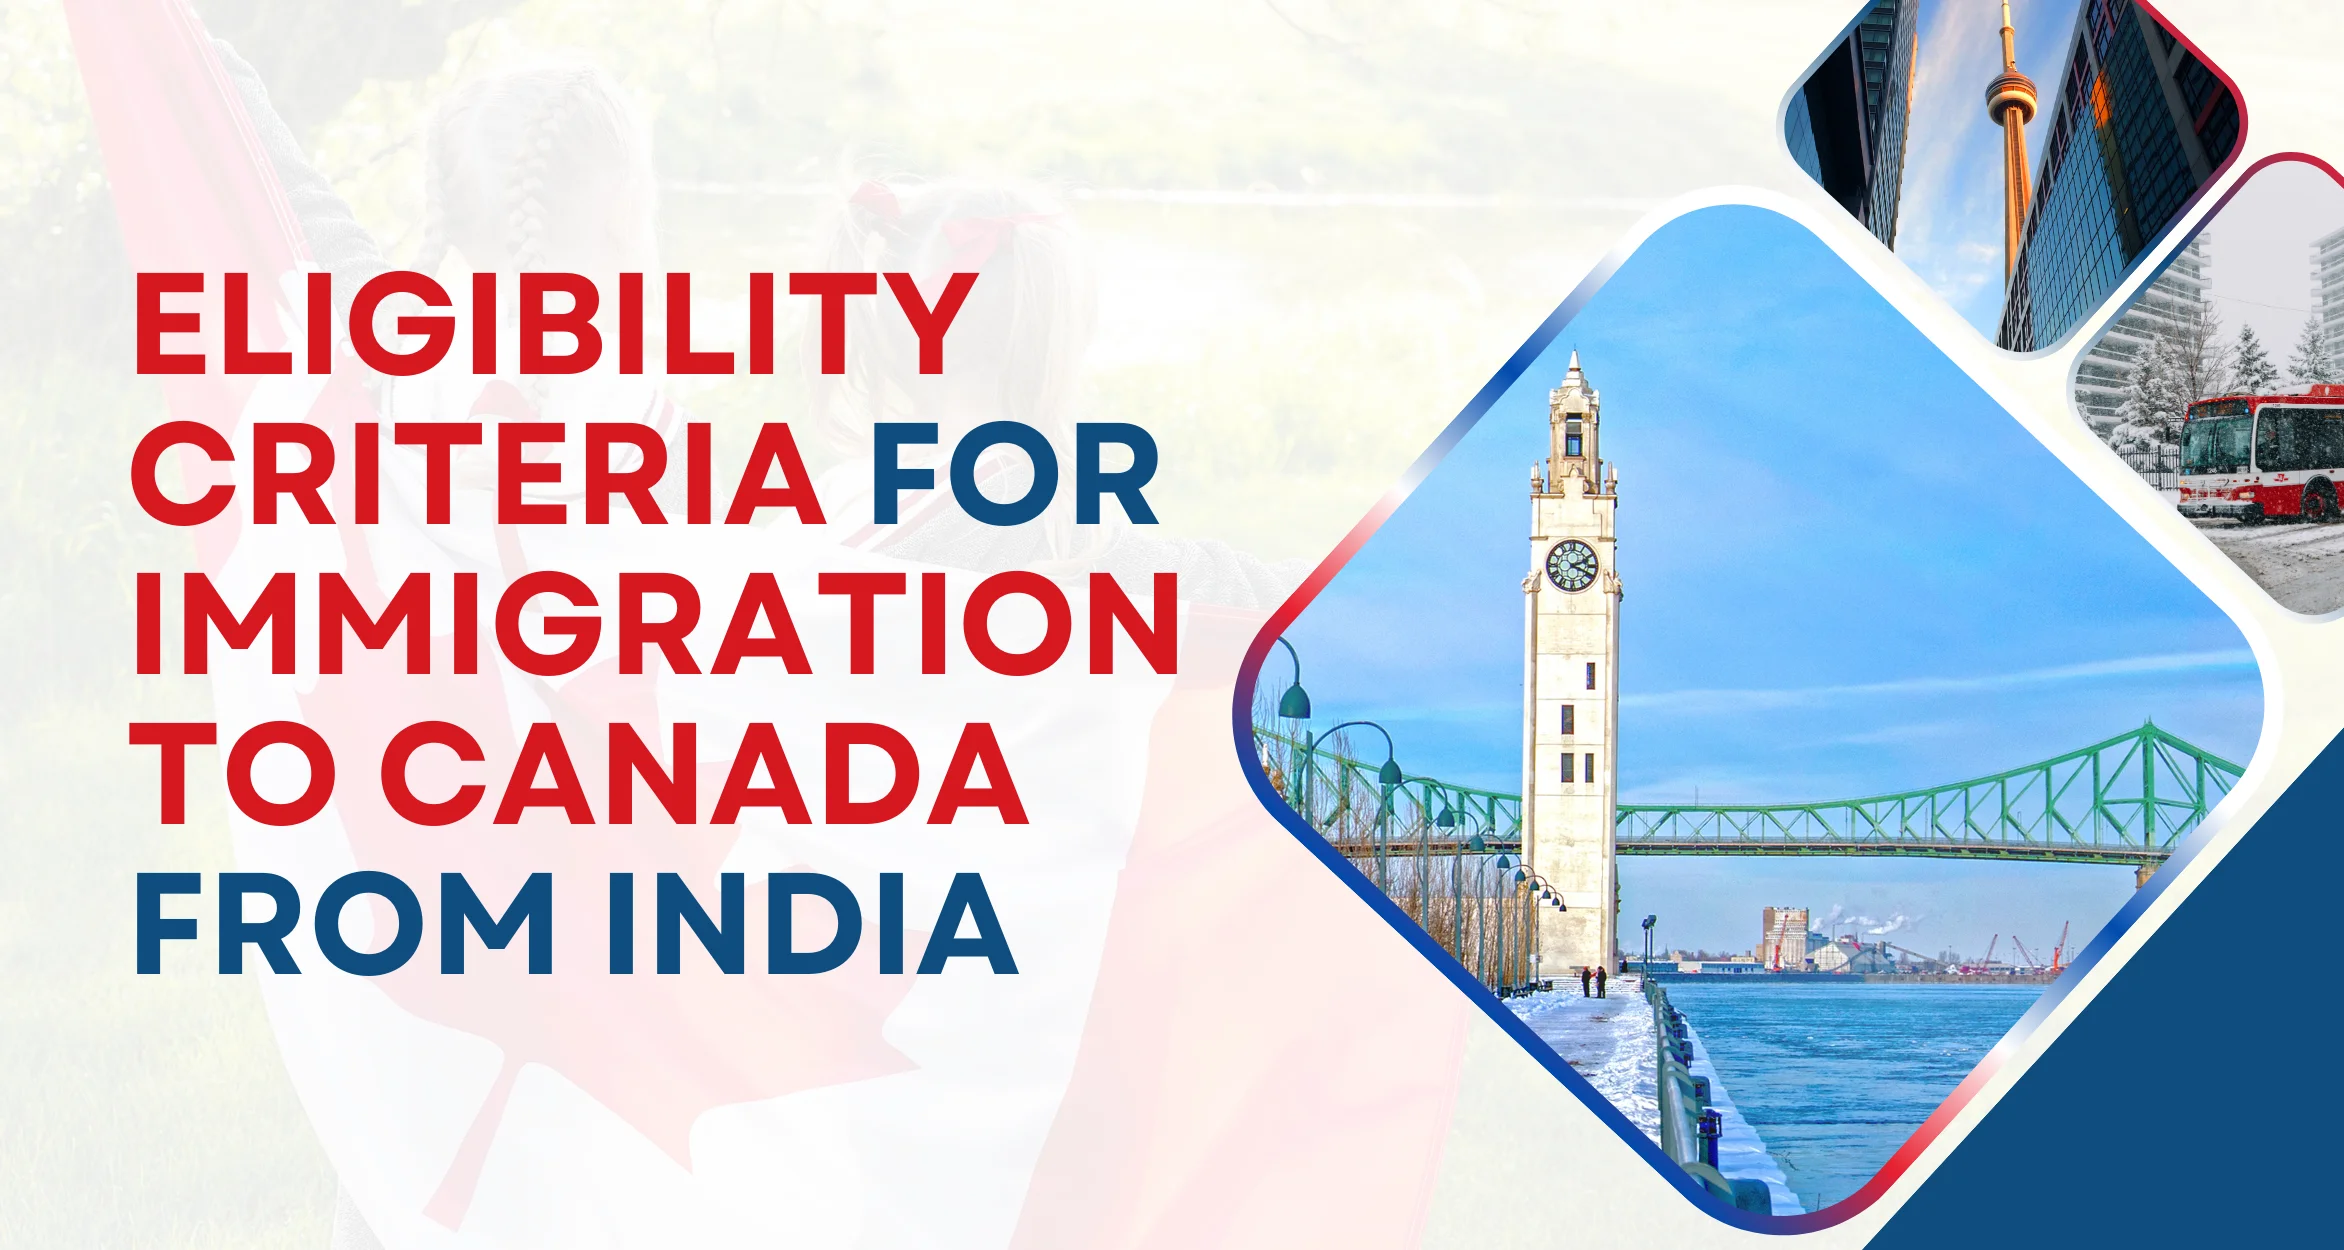 Eligibility criteria for Immigration to Canada from India